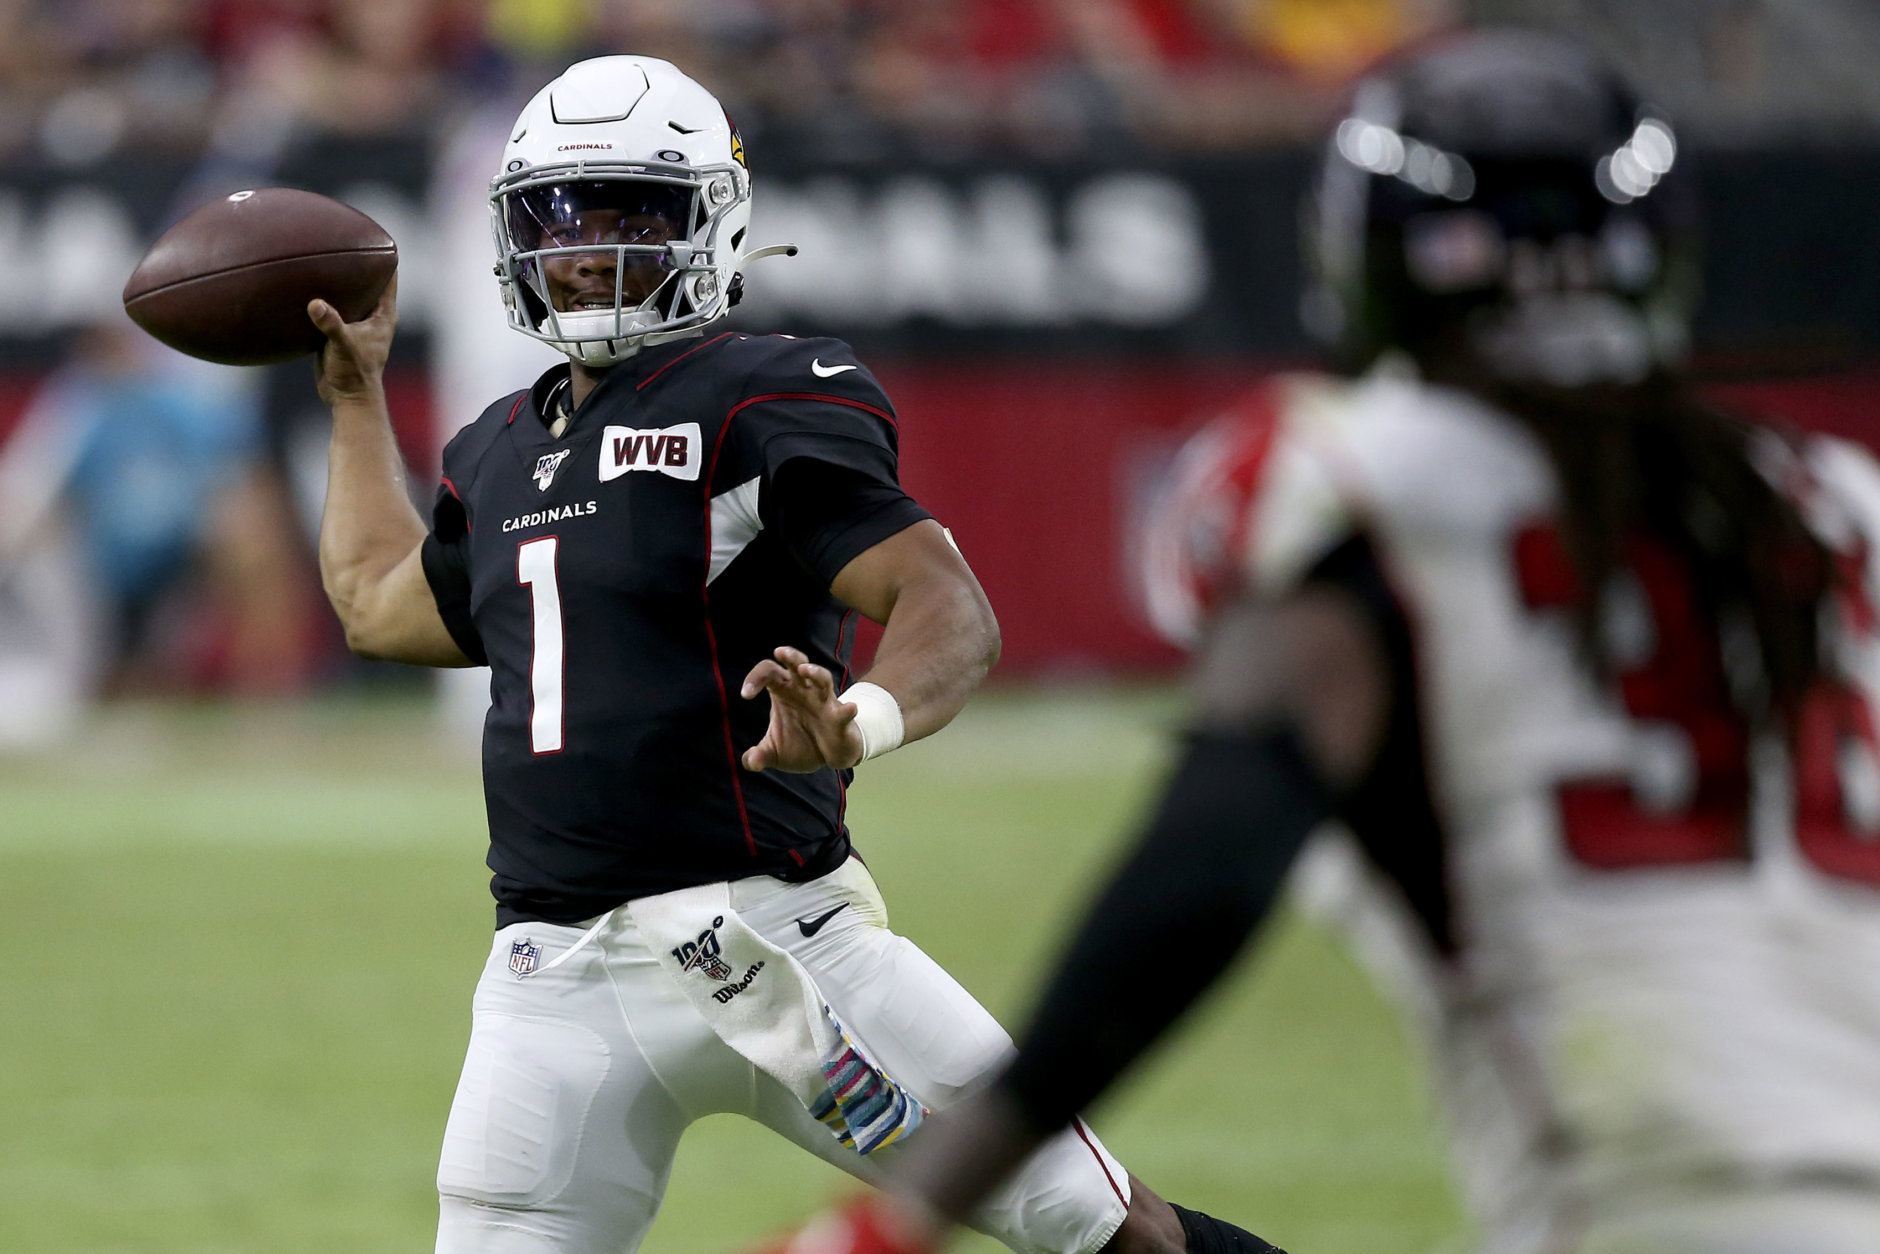 <div><b><i>Falcons 33</i></b></div>
<div><b><i>Cardinals 34</i></b></div>
<div></div>
<div>Give it up for Kyler Murray, y&#8217;all. The rookie outdueled a former MVP and became only the third player in NFL history to throw for 300 yards in half of his first six games. His future is bright, even if Arizona&#8217;s present fortunes aren&#8217;t necessarily.</div>
<div></div>
<div>And if this was Step 1 of <a href="https://profootballtalk.nbcsports.com/2019/10/13/dan-quinn-has-three-games-to-turn-things-around/">Dan Quinn&#8217;s three-week process</a> of turning around the most disappointing team in the league … he&#8217;s already fired.</div>
